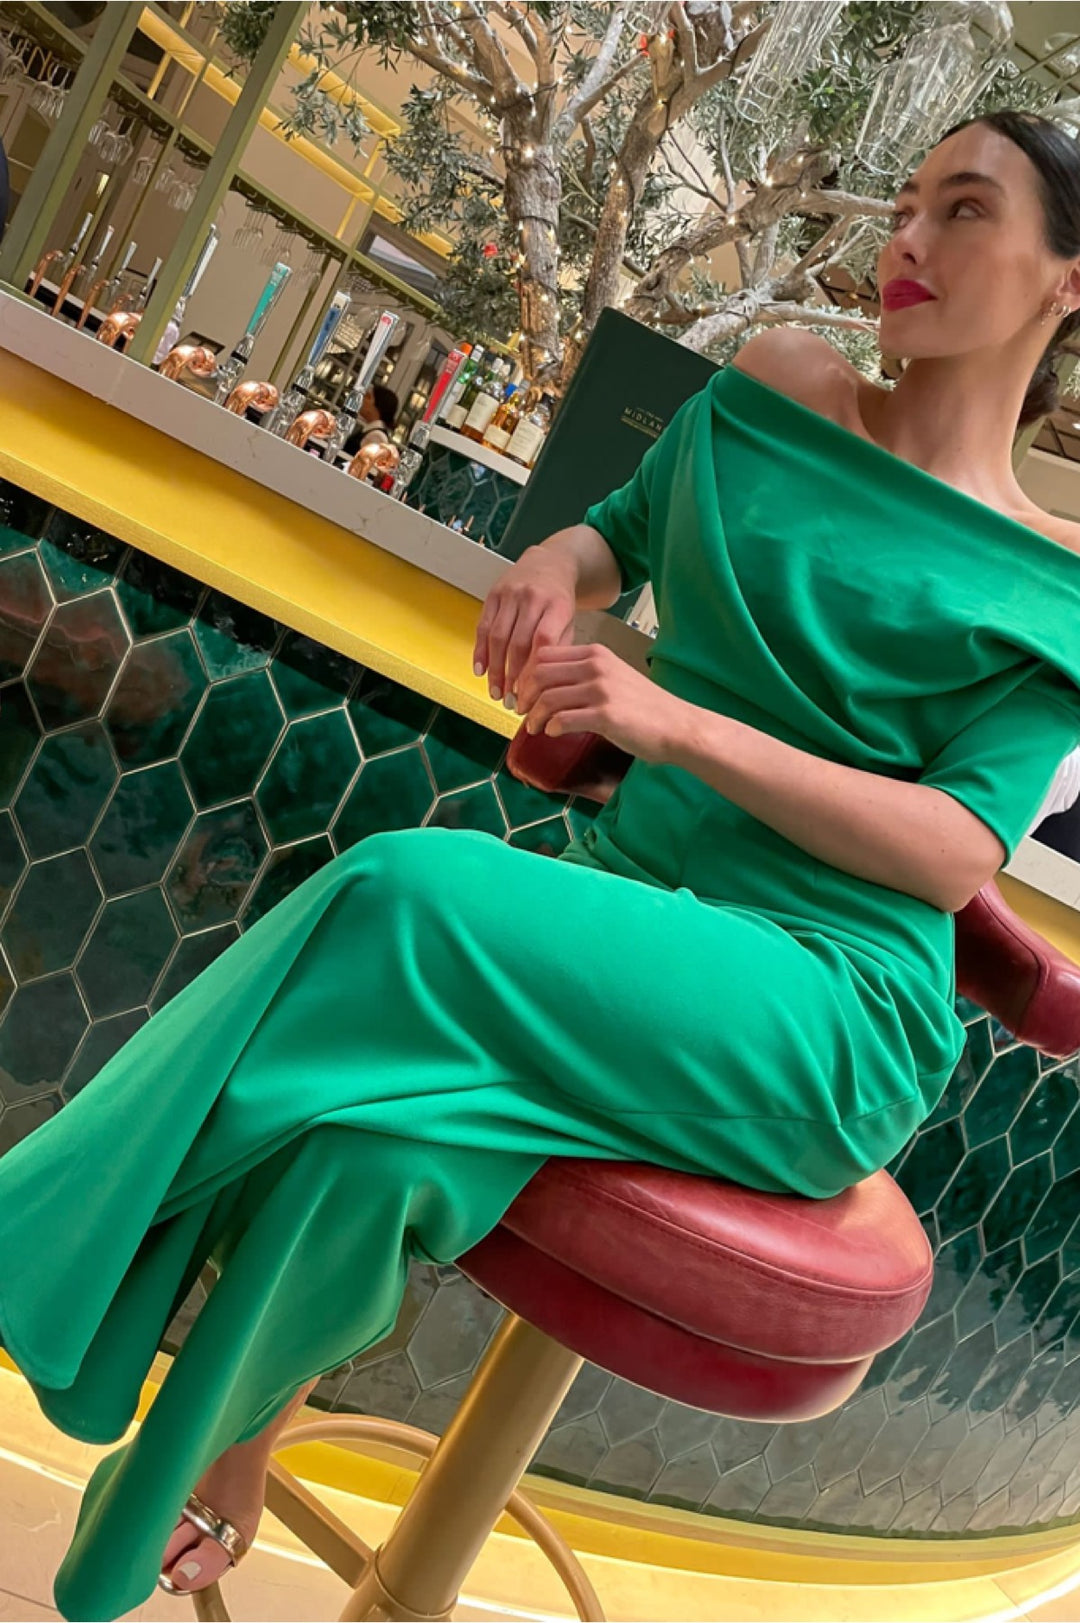 ATOM LABEL lima jumpsuit in emerald green